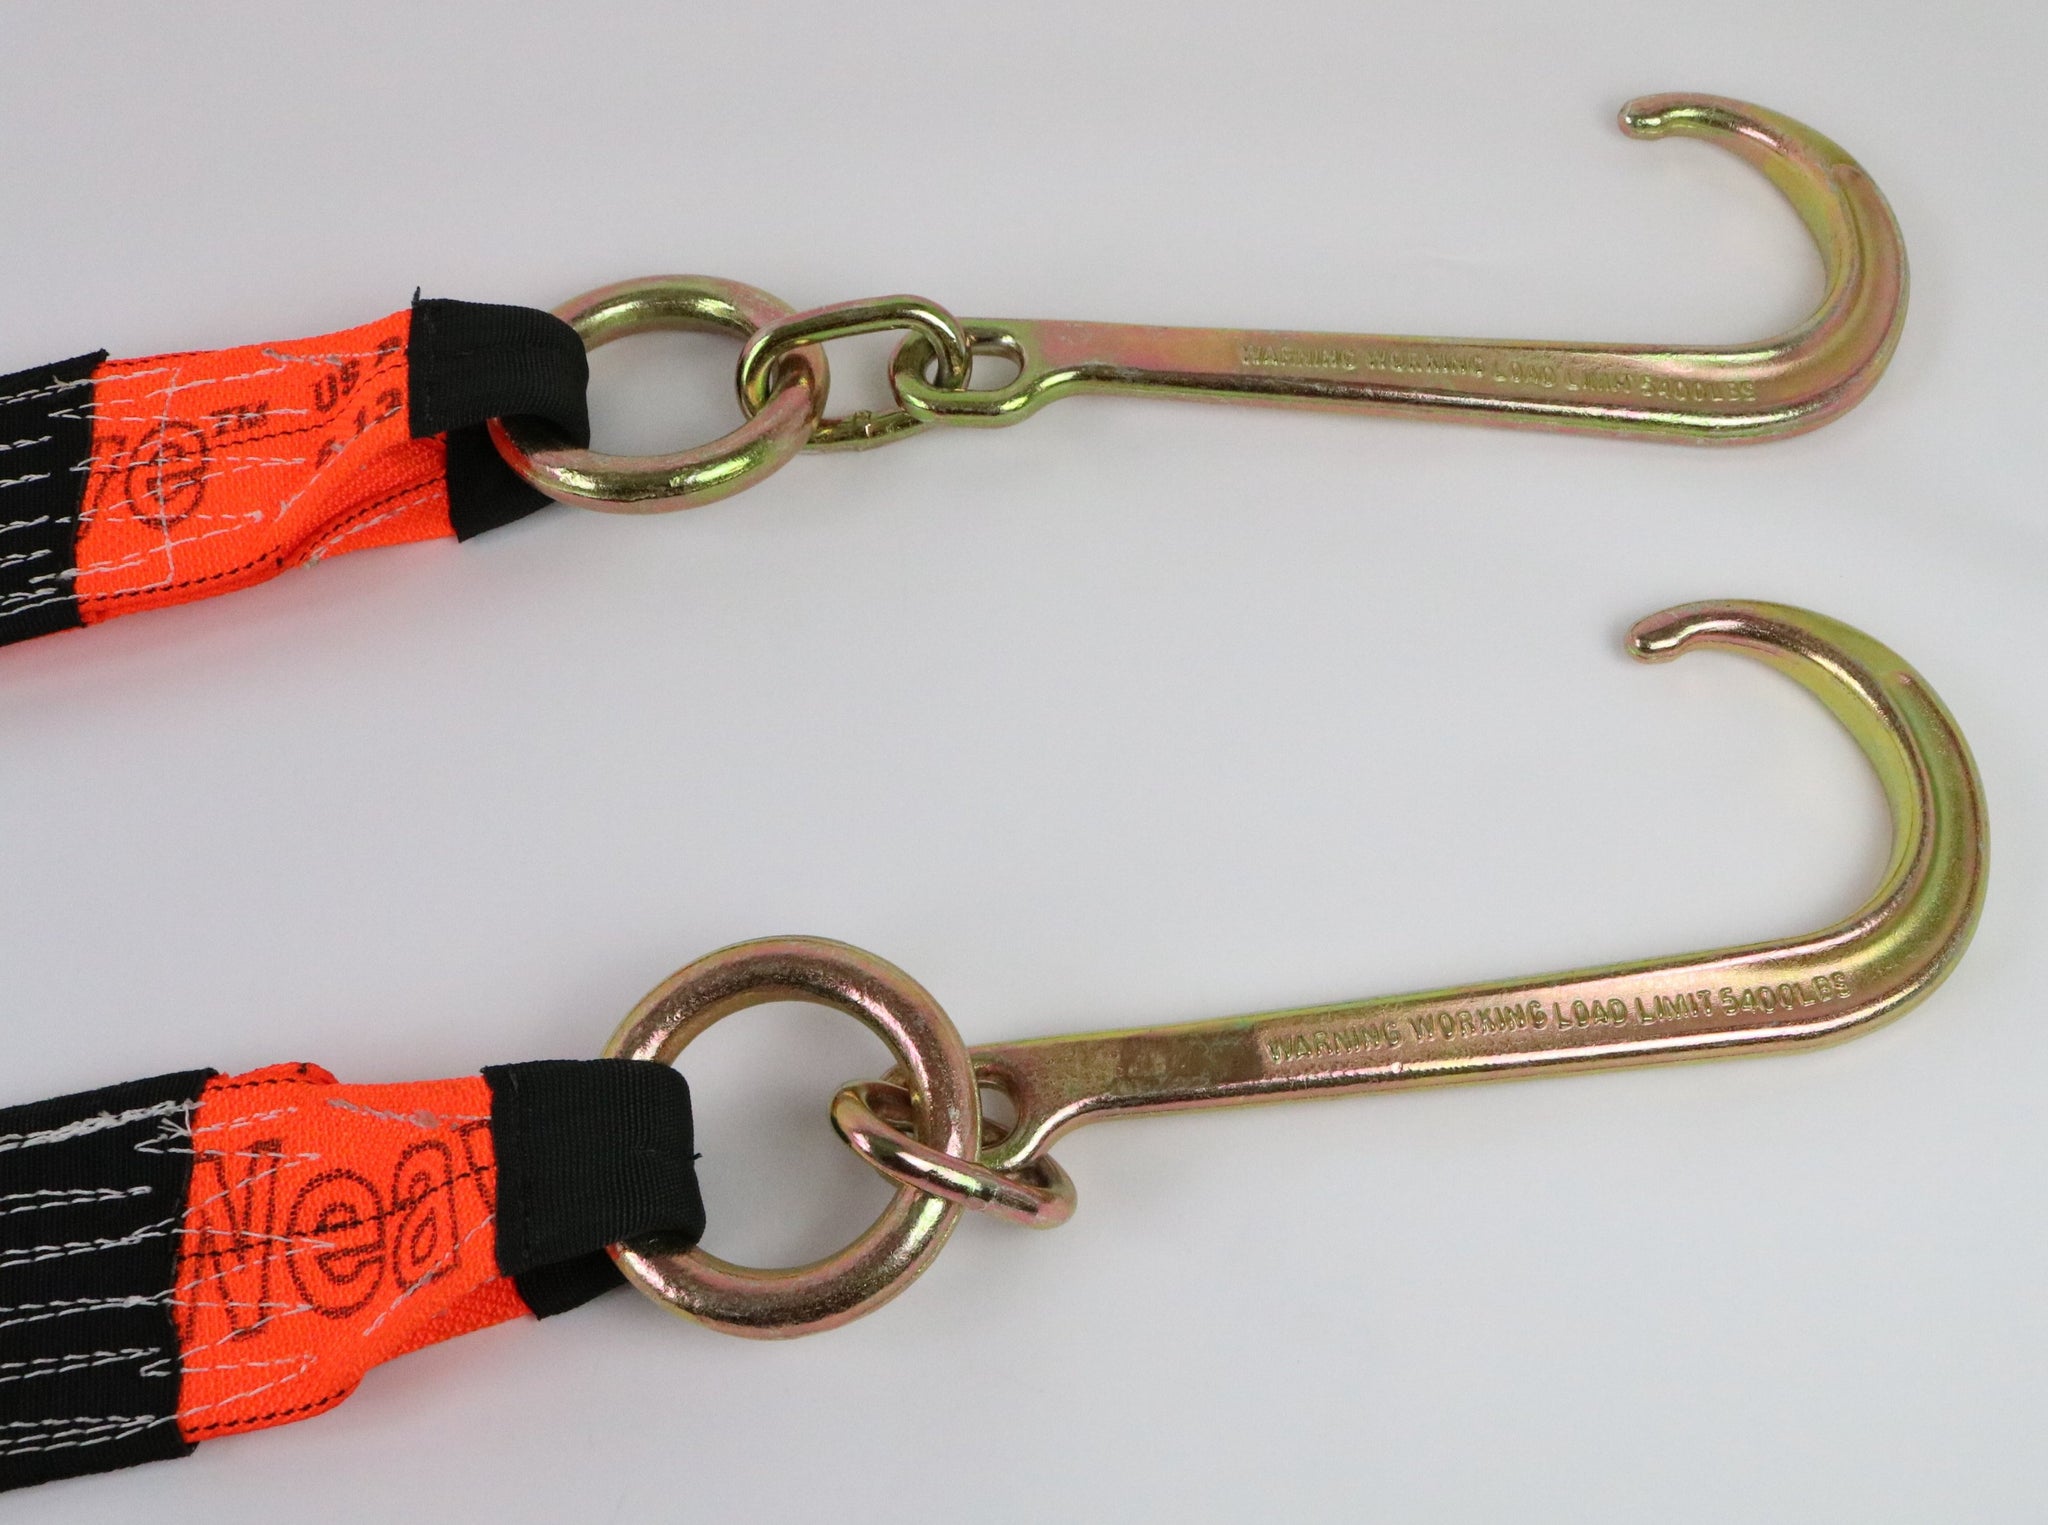 Towing V Bridle 4 inch x 60 inch with 15 inch J Hook And